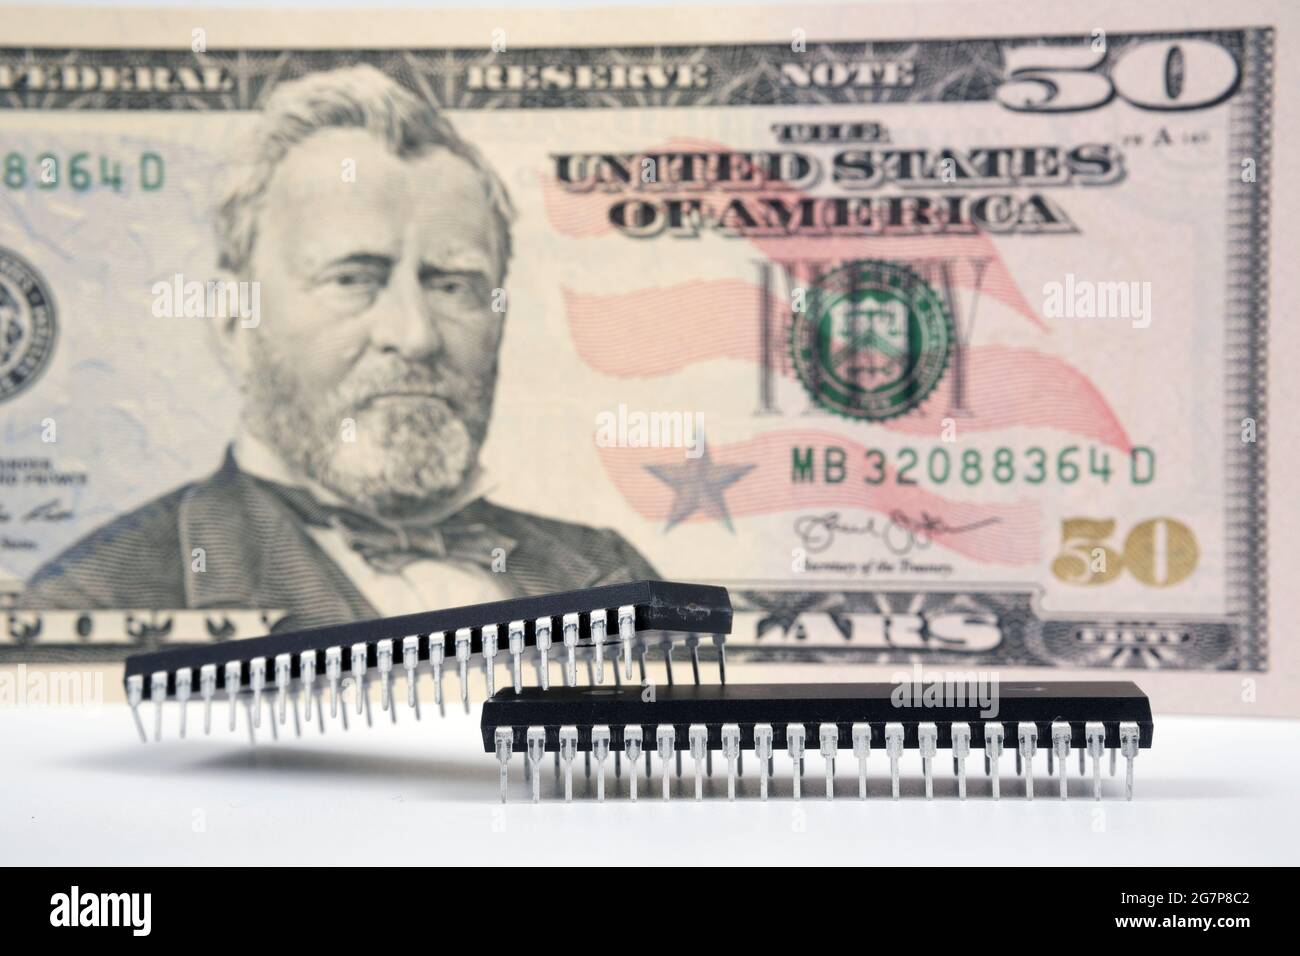 Large computer chips placed next to 50 US dollar banknote. Concept for investment in semiconductor industry and golbal chip shortage. Stock Photo